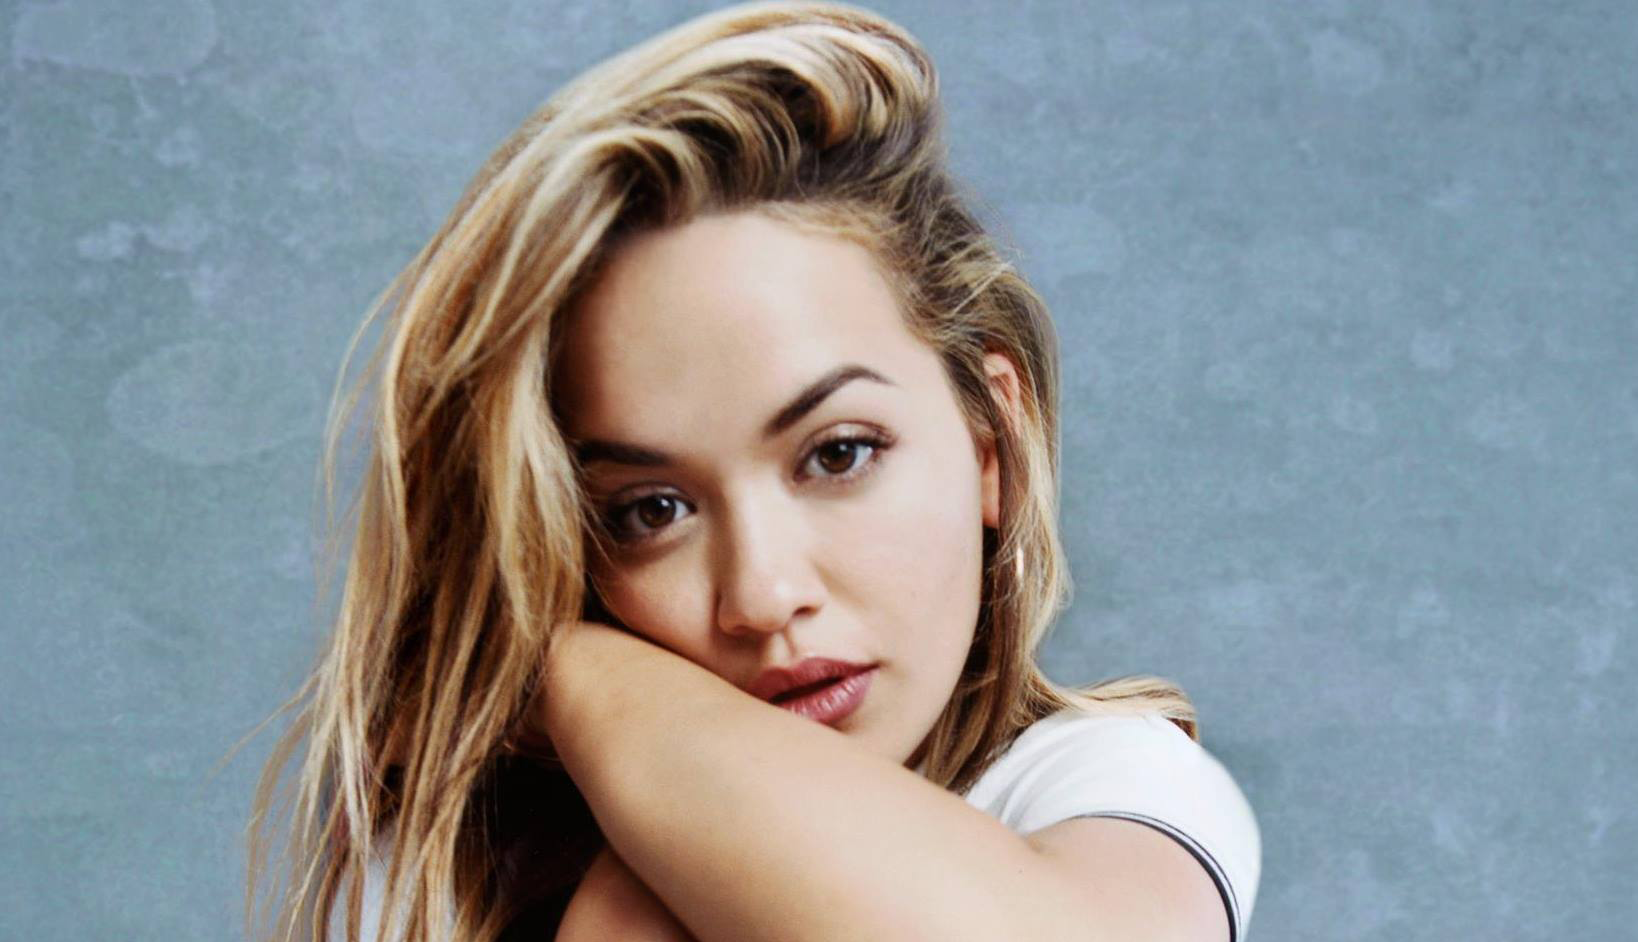 We're Giving You The Chance To Ask Rita Ora Anything